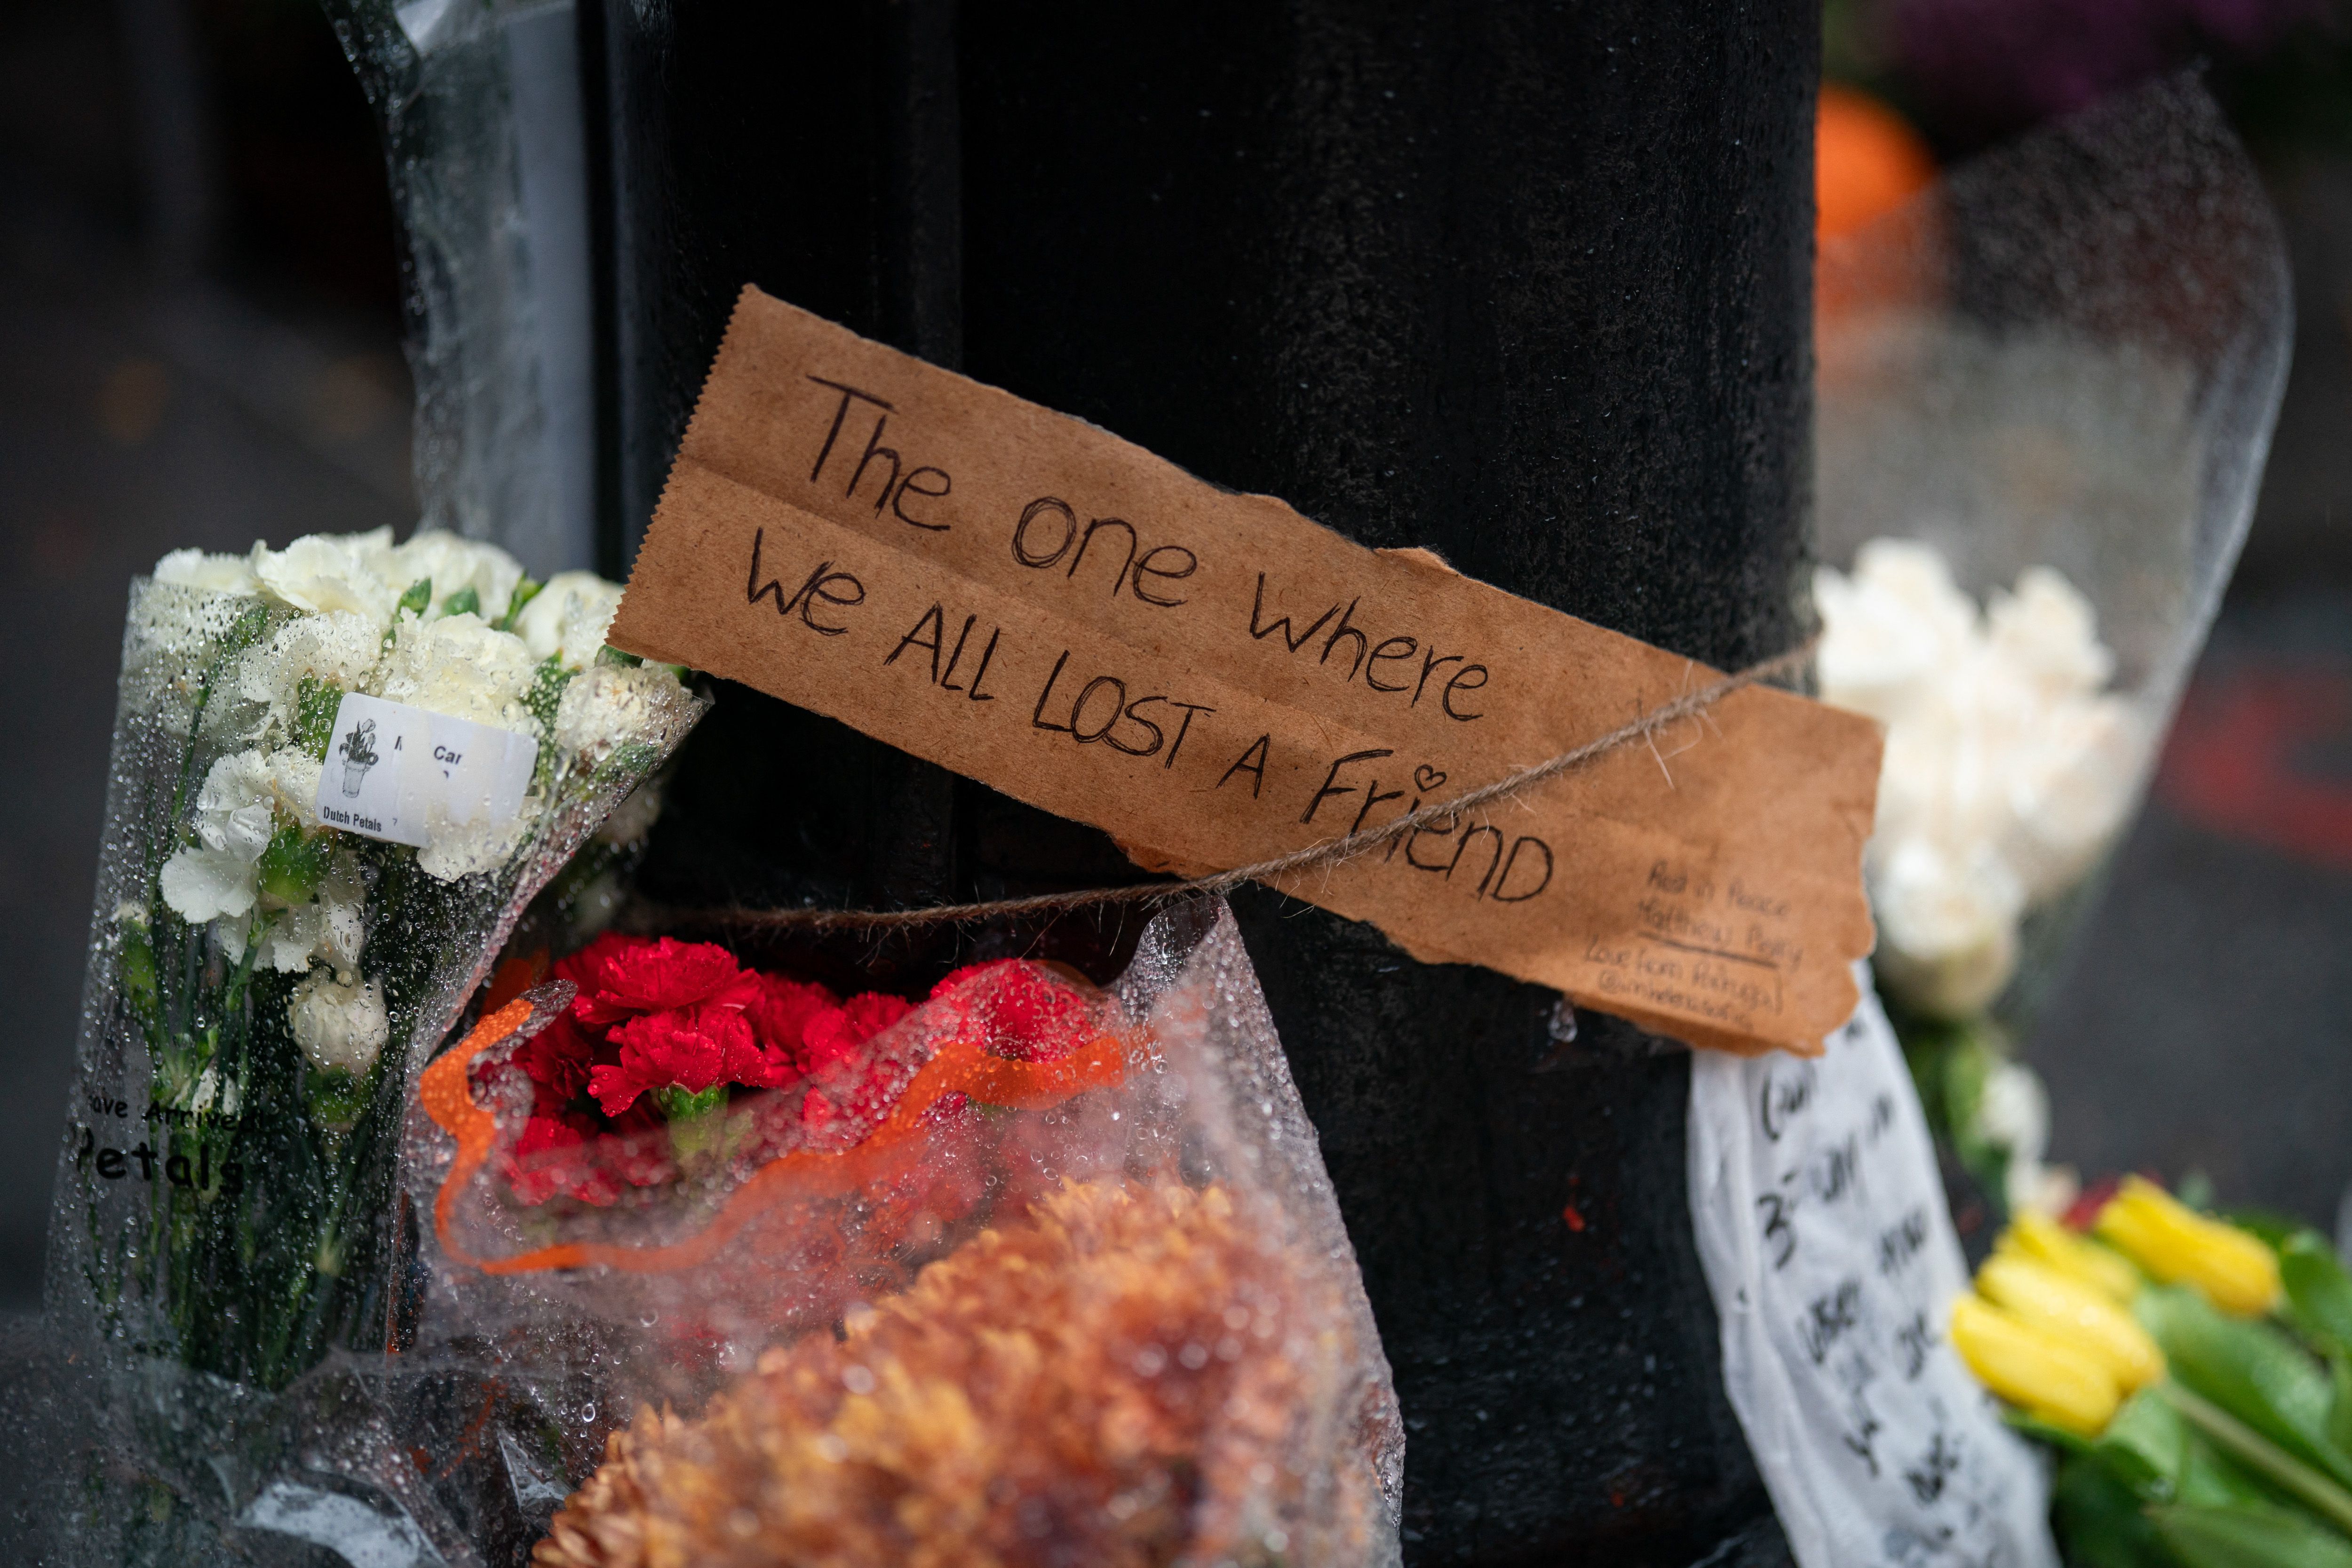 Floral tributes are left for Matthew Perry outside the apartment building, which was used as the exterior shot in the TV show "Friends" in New York on October 29, 2023. | Source: Getty Images